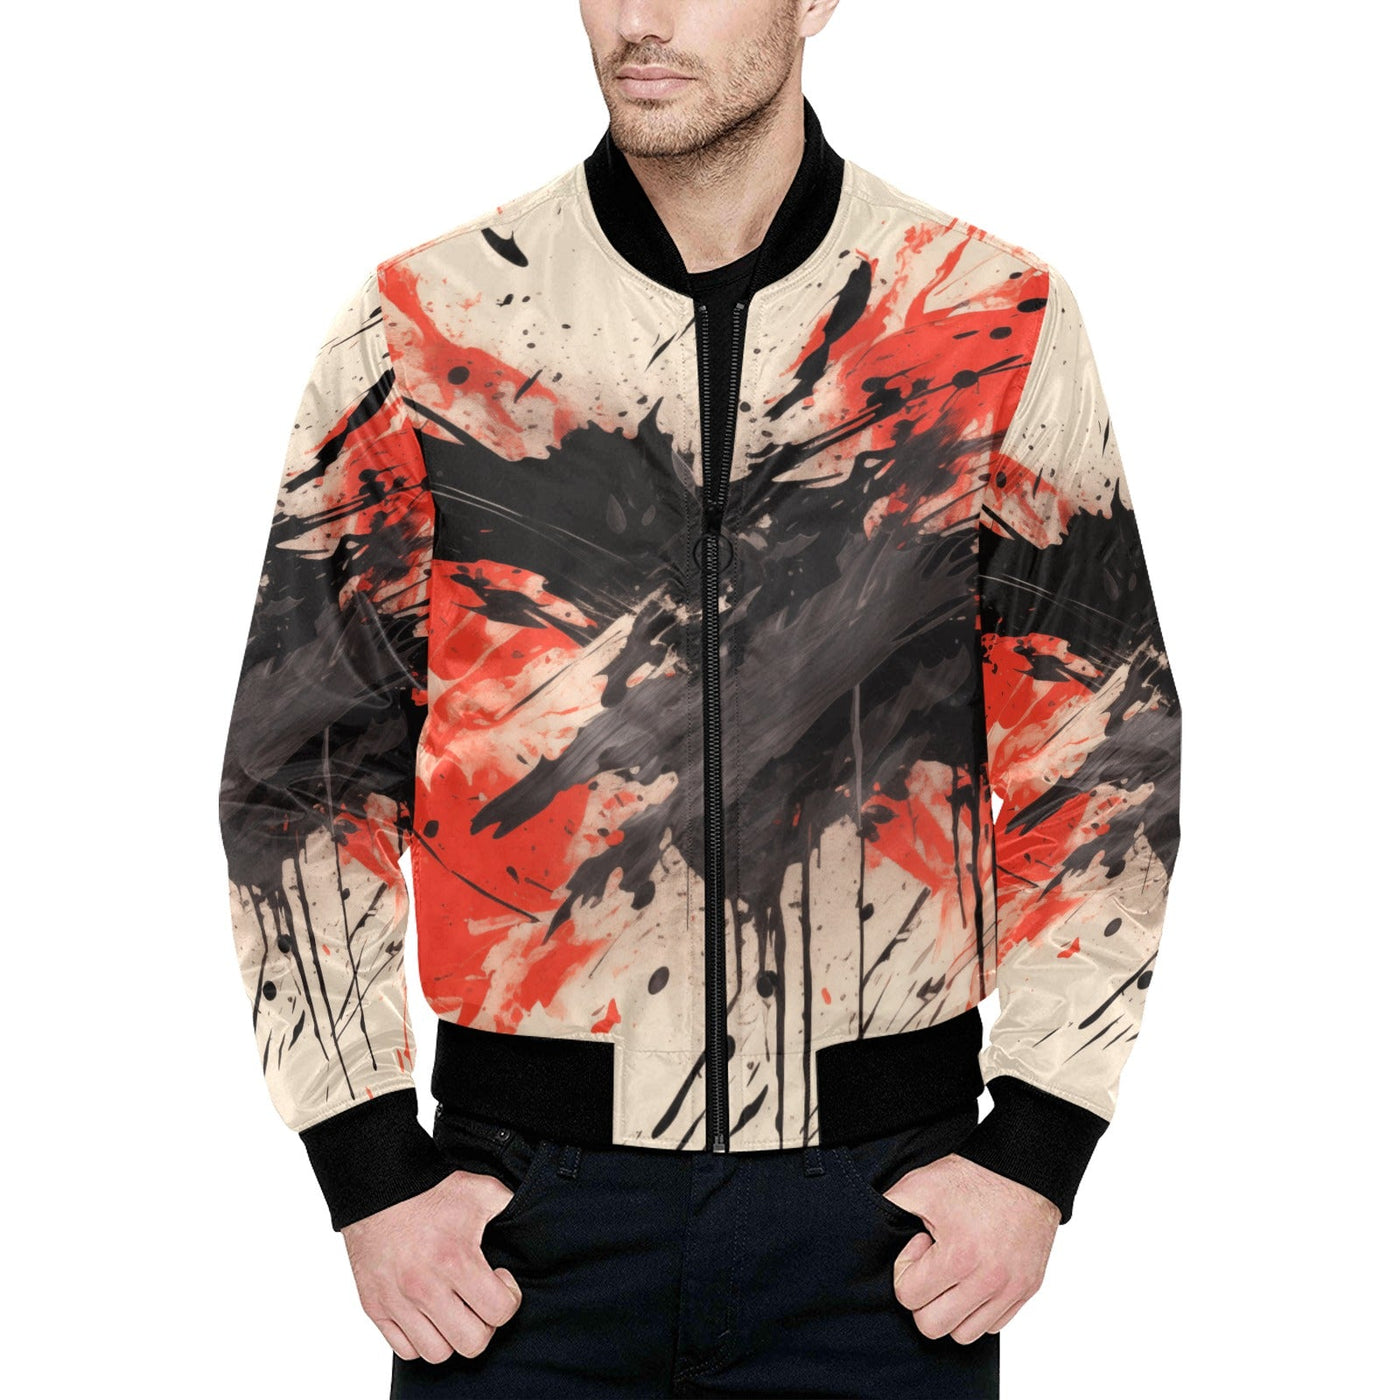 Radiant Sunrise: Japanese Abstract Design quilted Bomber Jacket